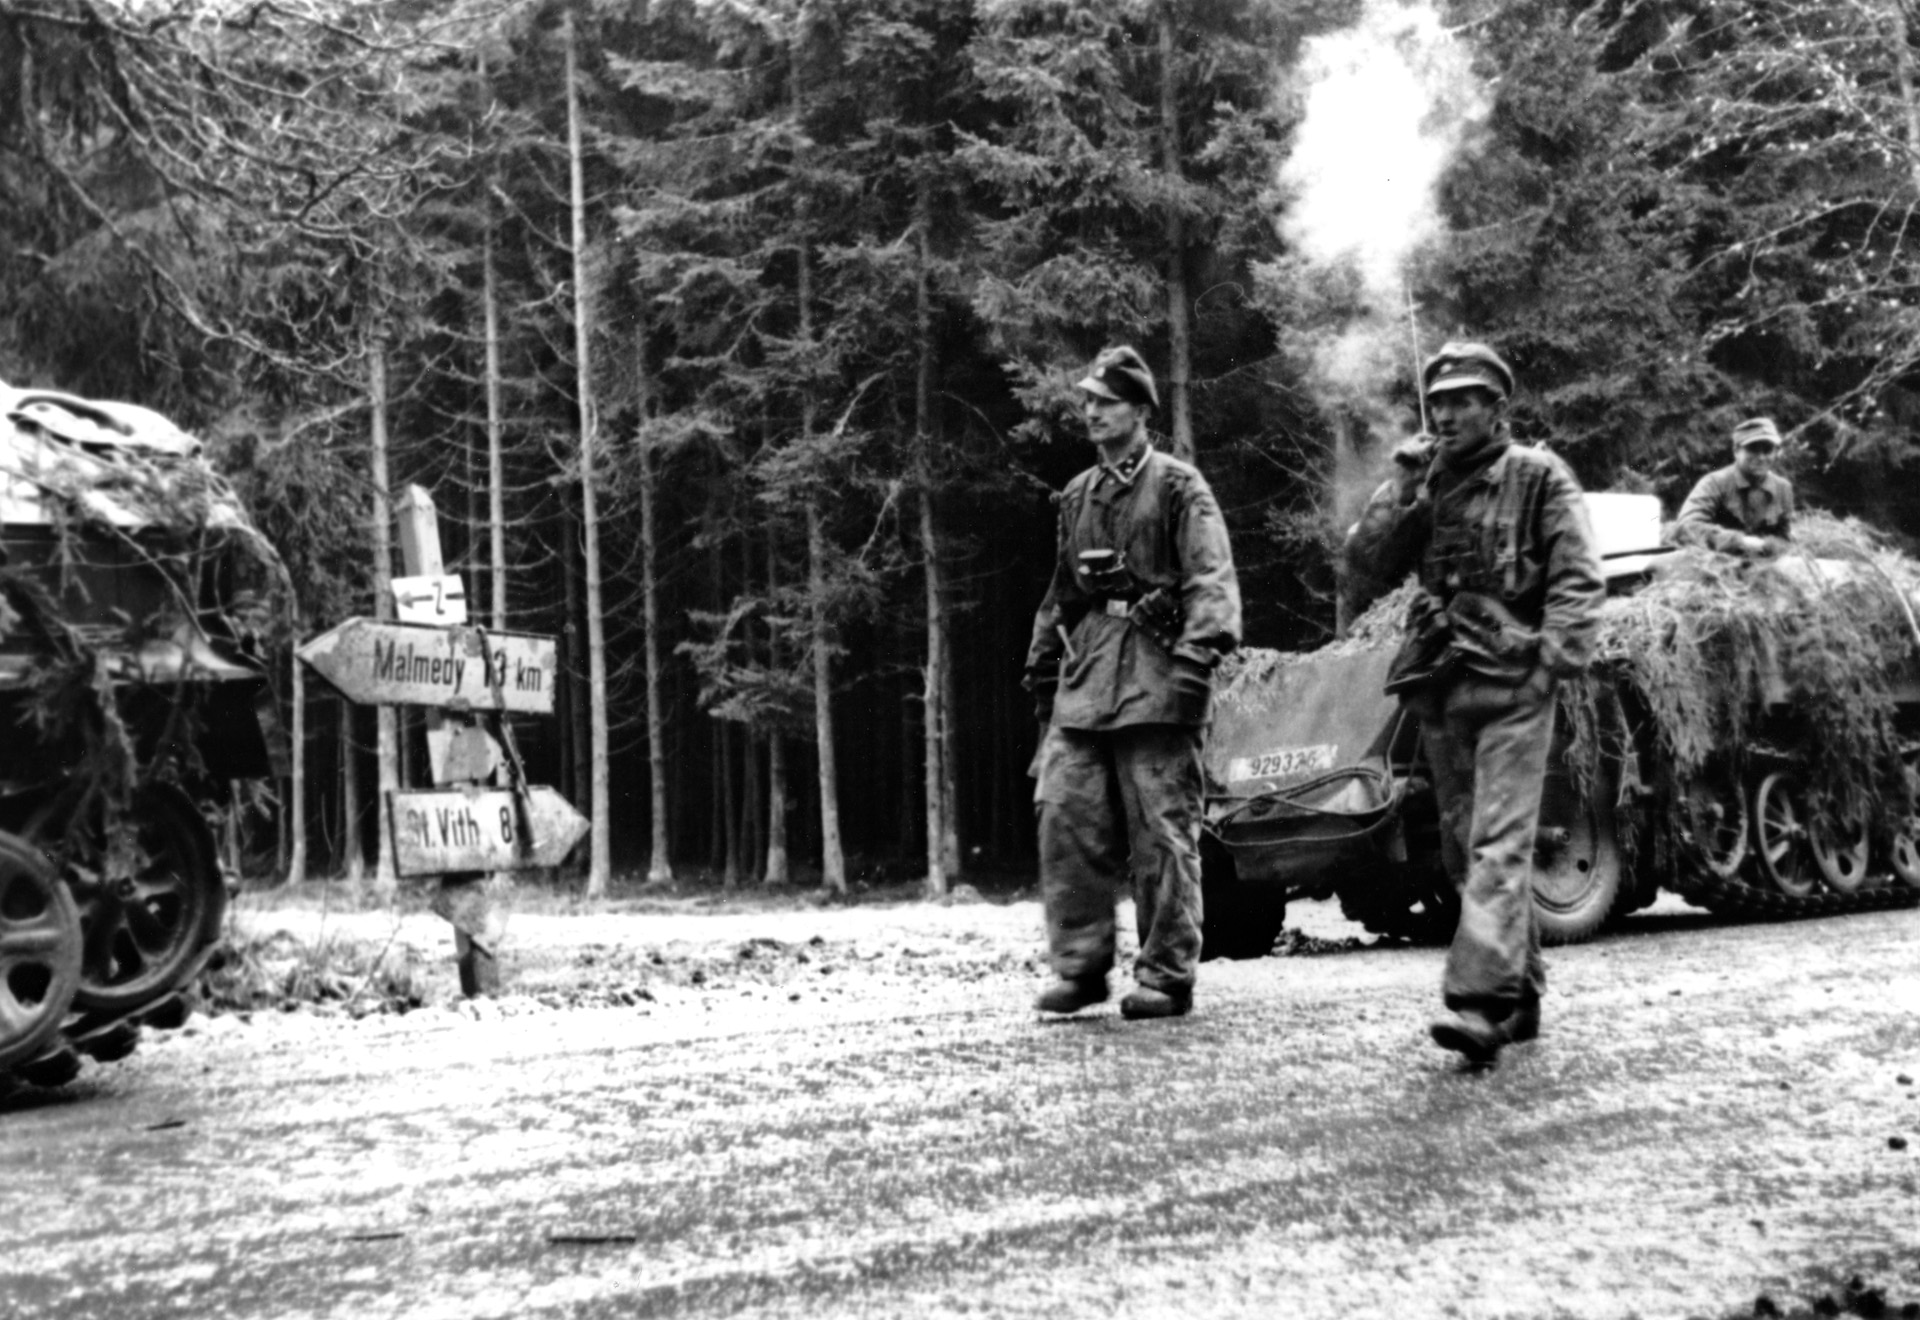 Smoke from his cigar curls upward as an SS officer and his detachment pause at a road sign directing traffic toward the village of Malmedy, Belgium, during the opening hours of the German Ardennes offensive that came to be known as the Battle of the Bulge. In a field near Malmedy, troops under the command of SS Colonel Jochen Peiper committed one of the most infamous battlefield atrocities of World War II.